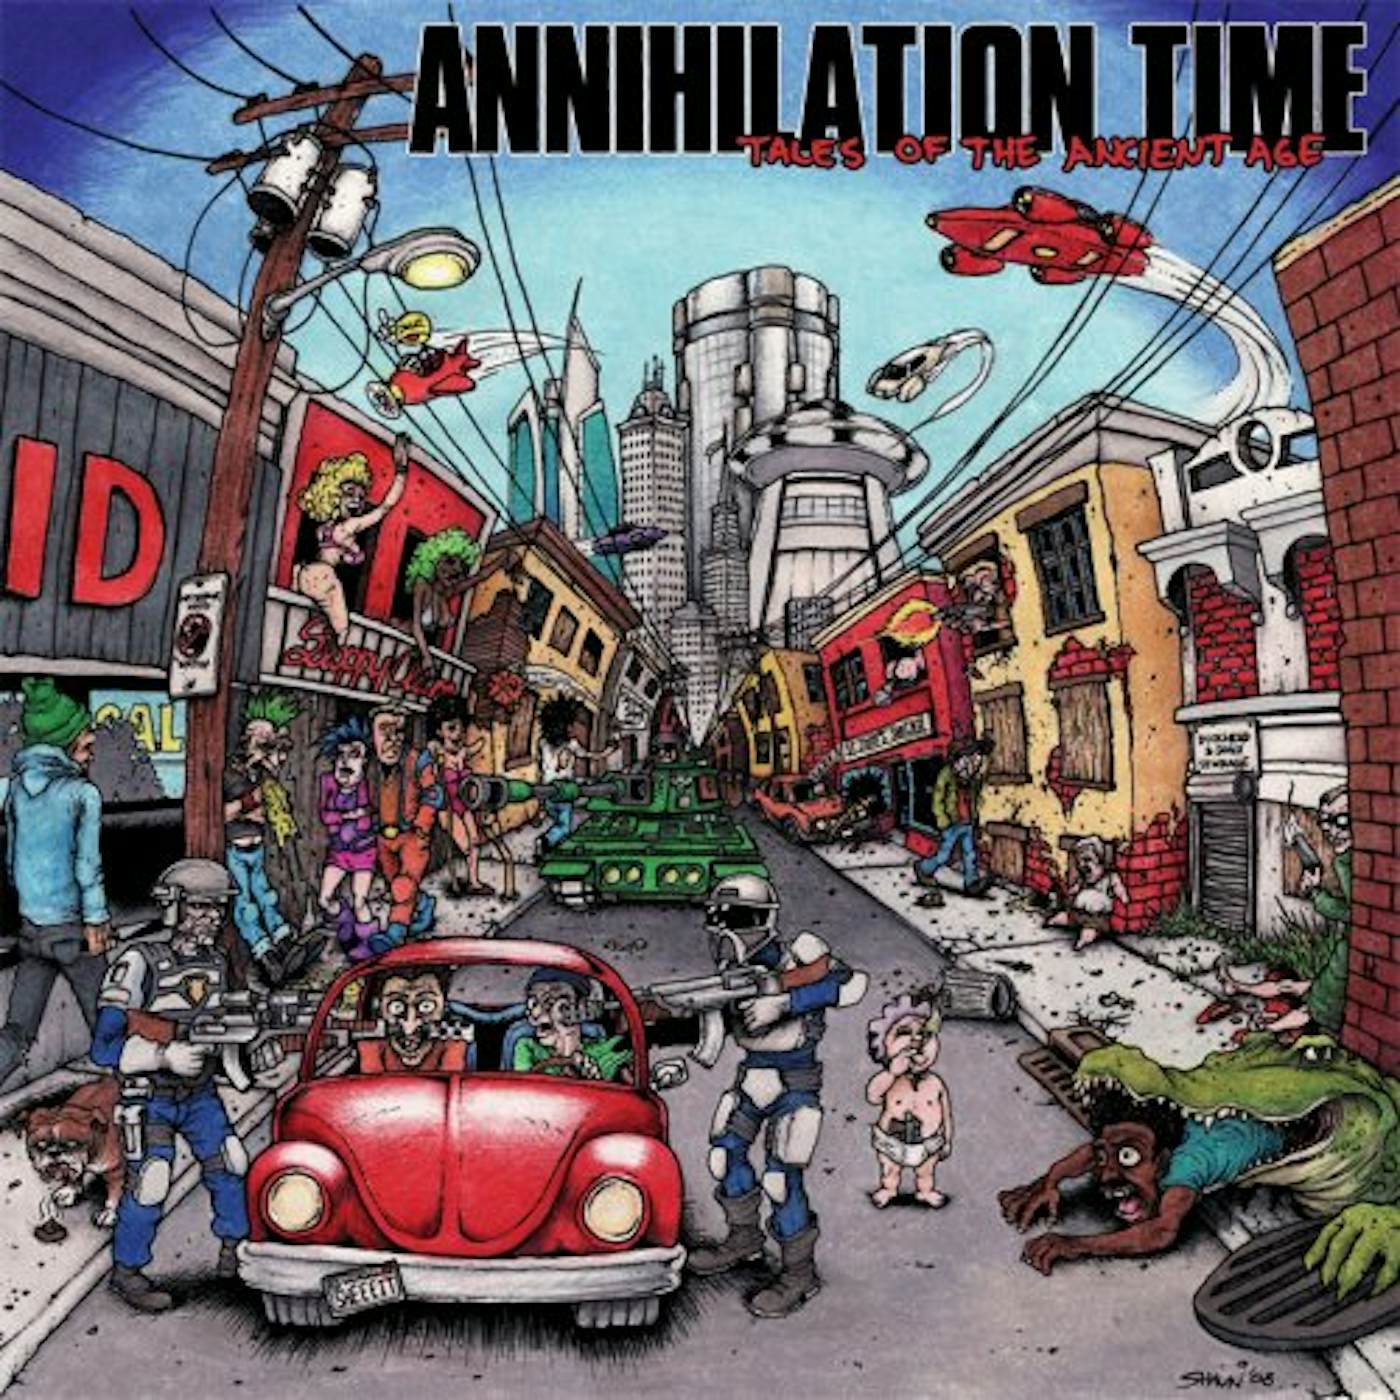 Annihilation Time TALES OF THE ANCIENT AGE Vinyl Record